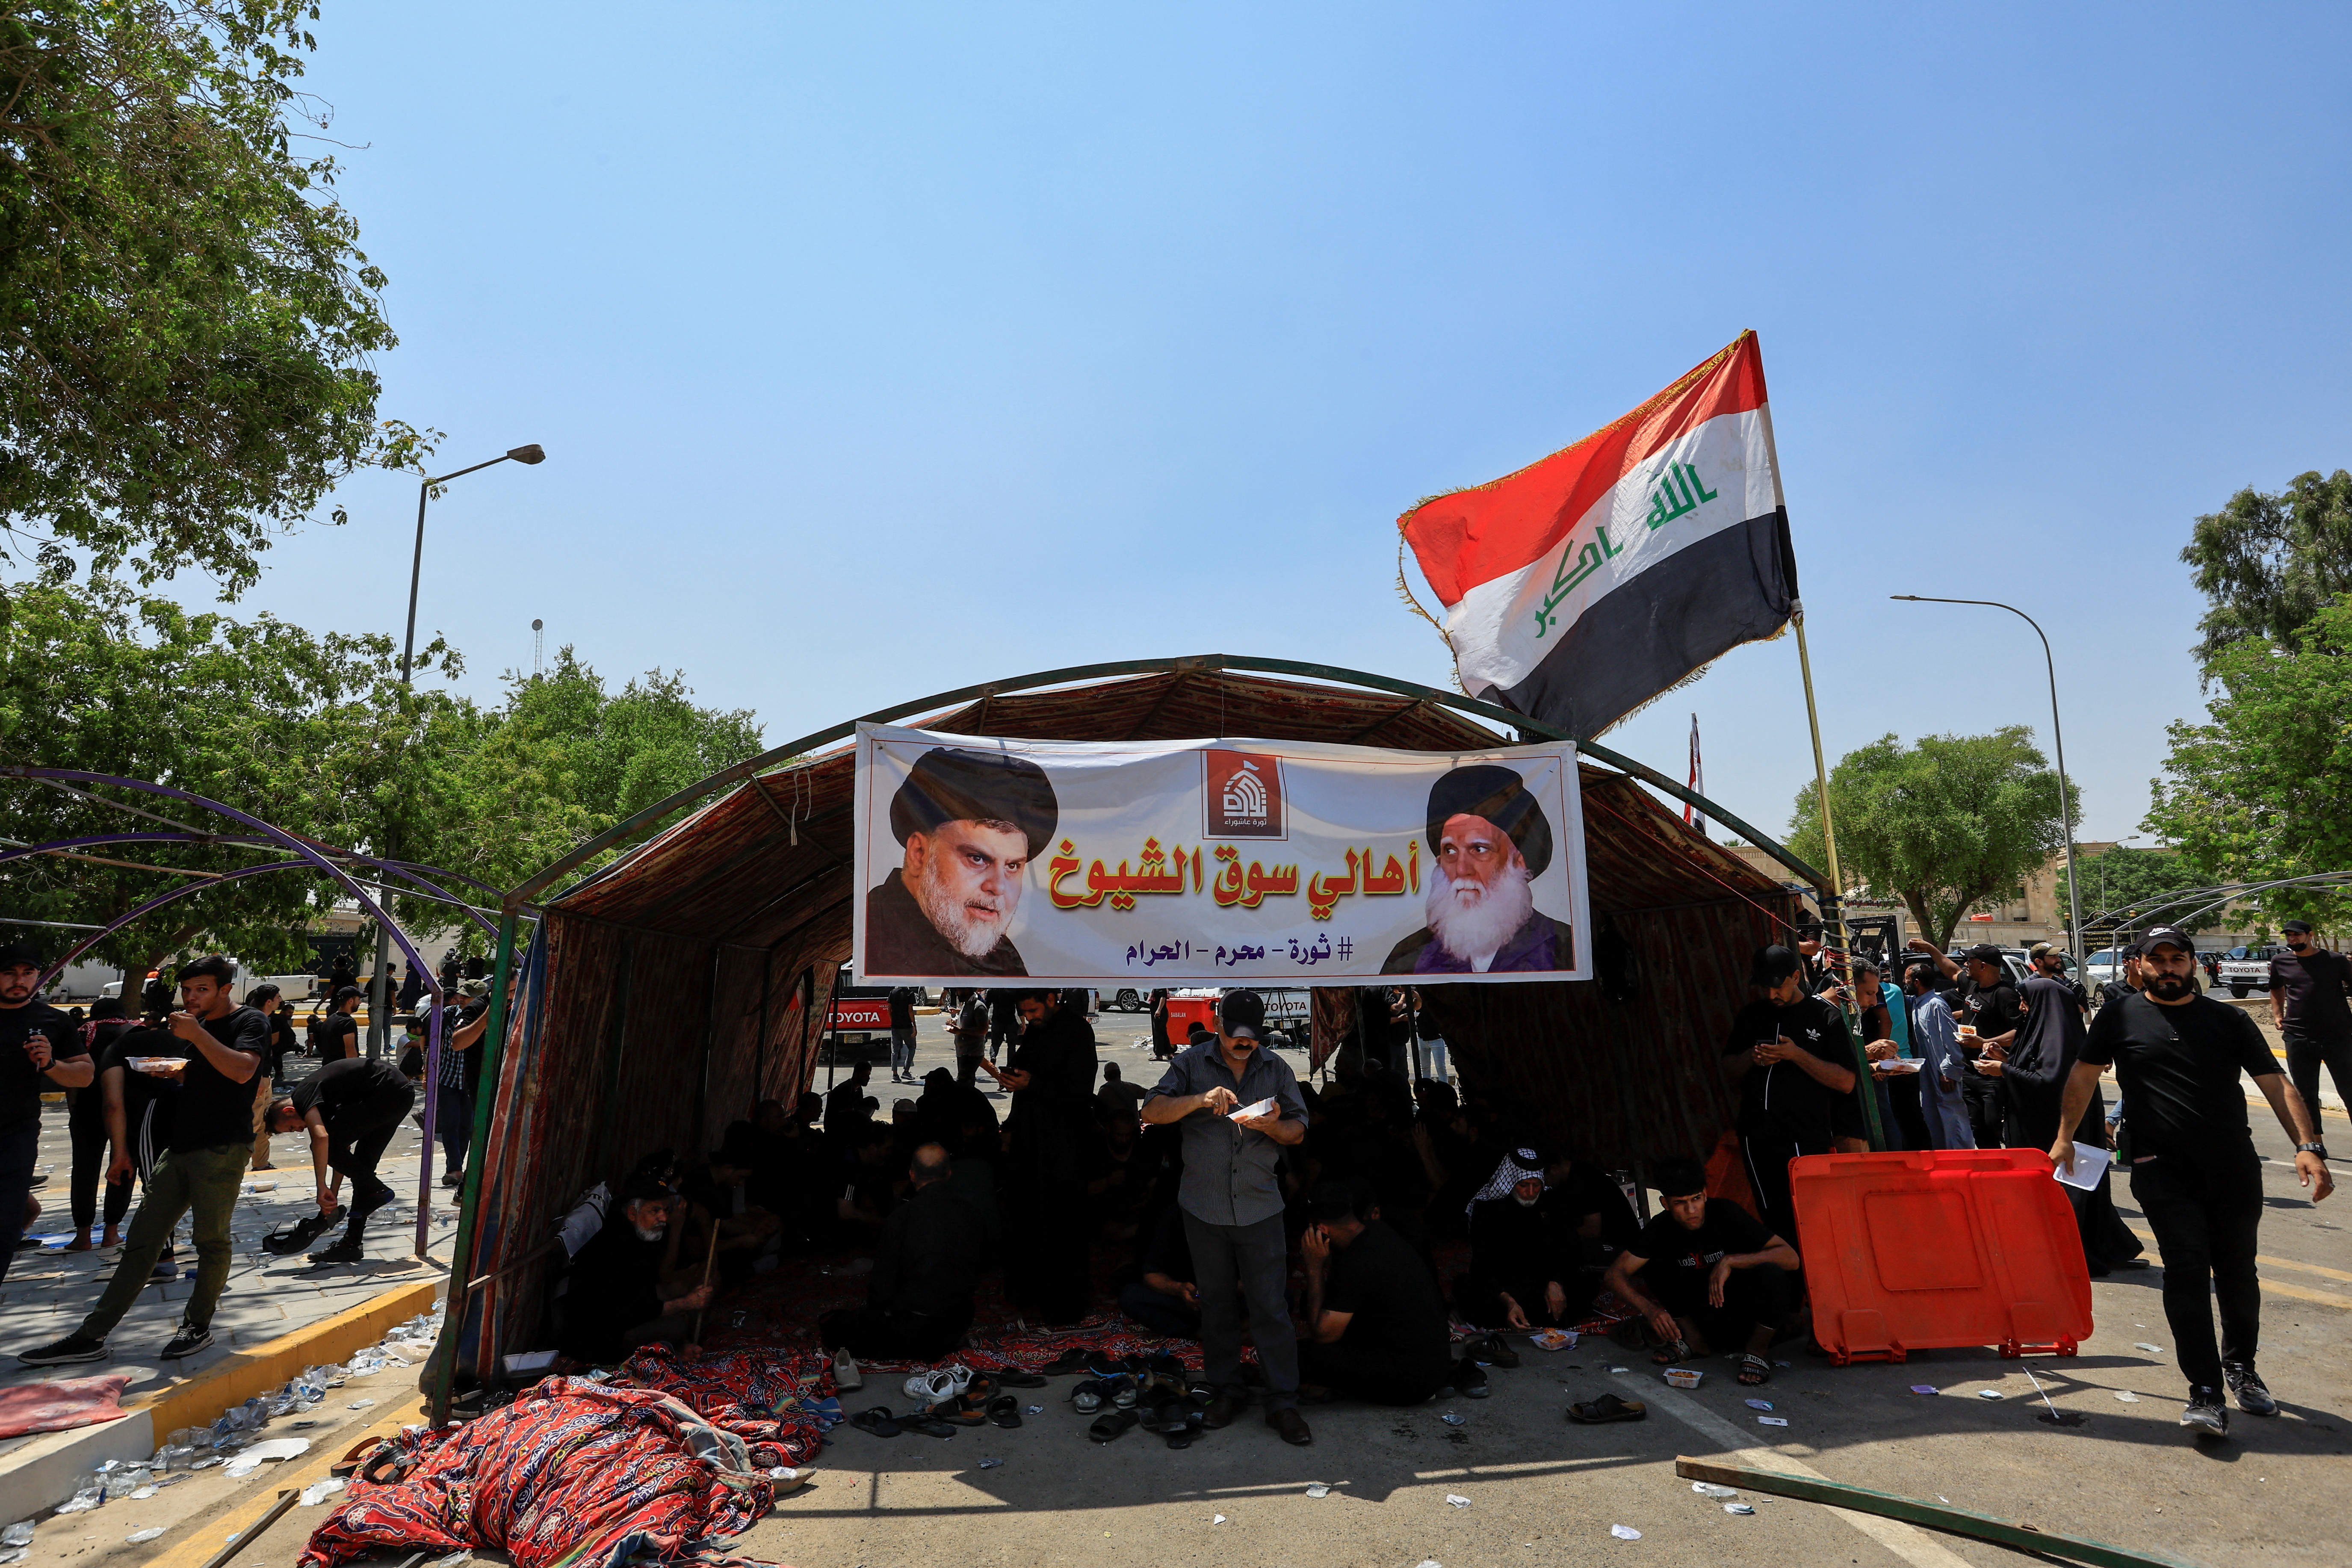 Supporters of Iraqi populist leader Moqtada al-Sadr gather for a sit-in in front of the gate of Supreme Judicial Council of Iraq in Baghdad